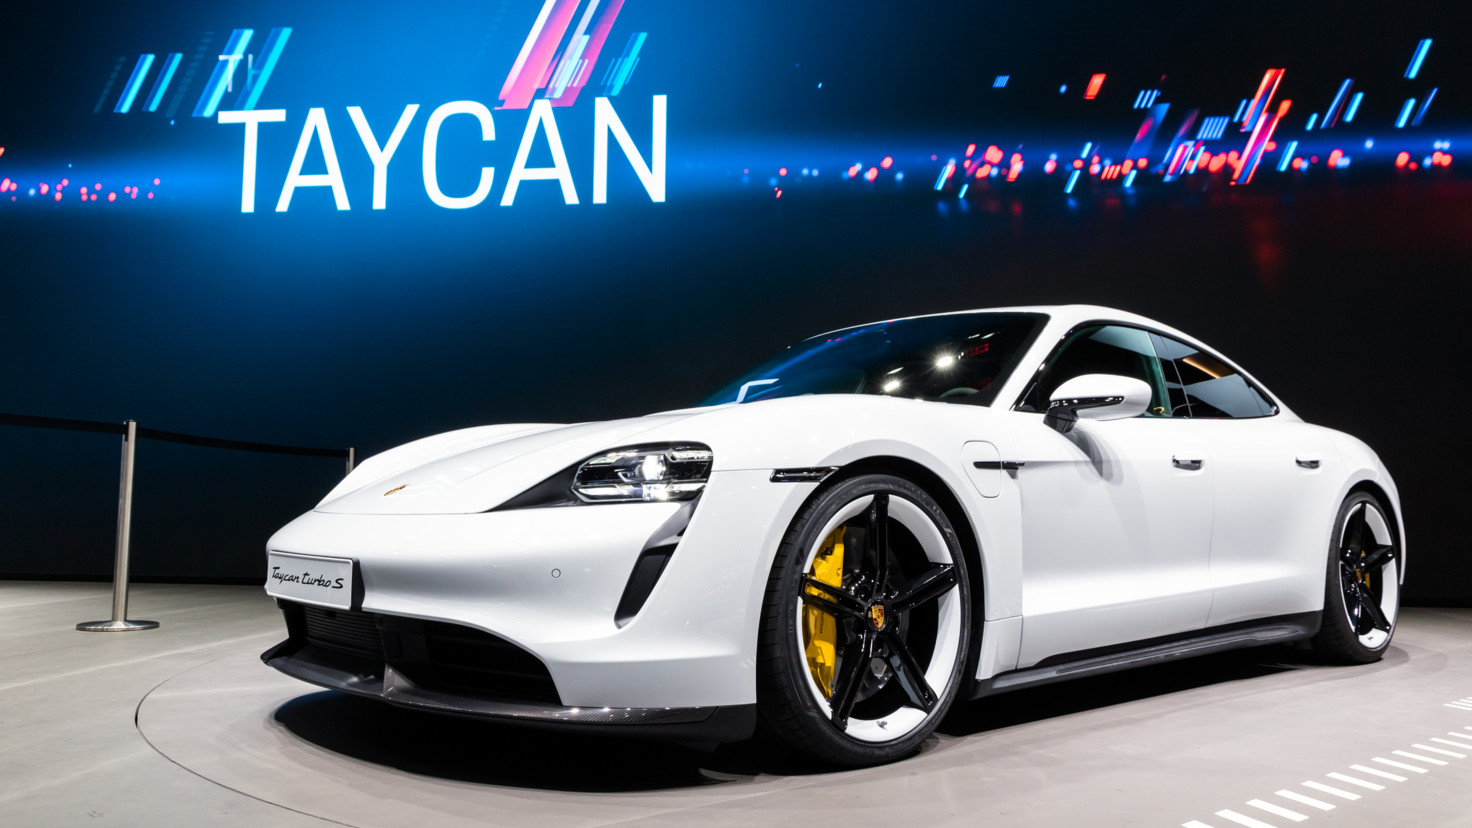 Porsche Taycan electric sports car tops 30,000 pre-orders | Currency.com